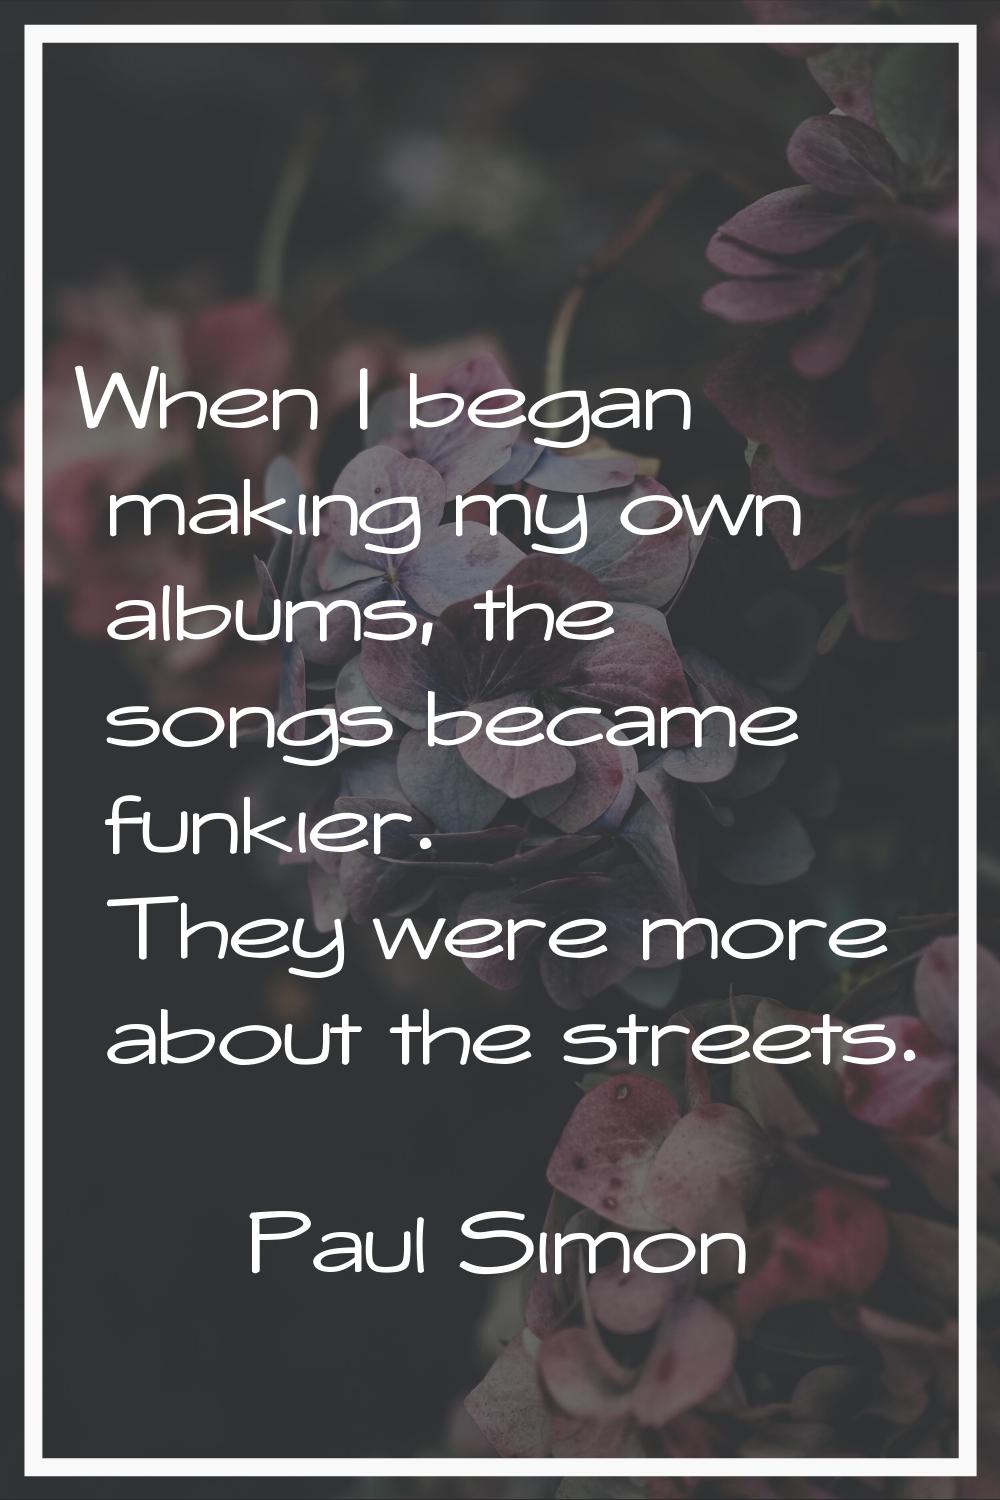 When I began making my own albums, the songs became funkier. They were more about the streets.